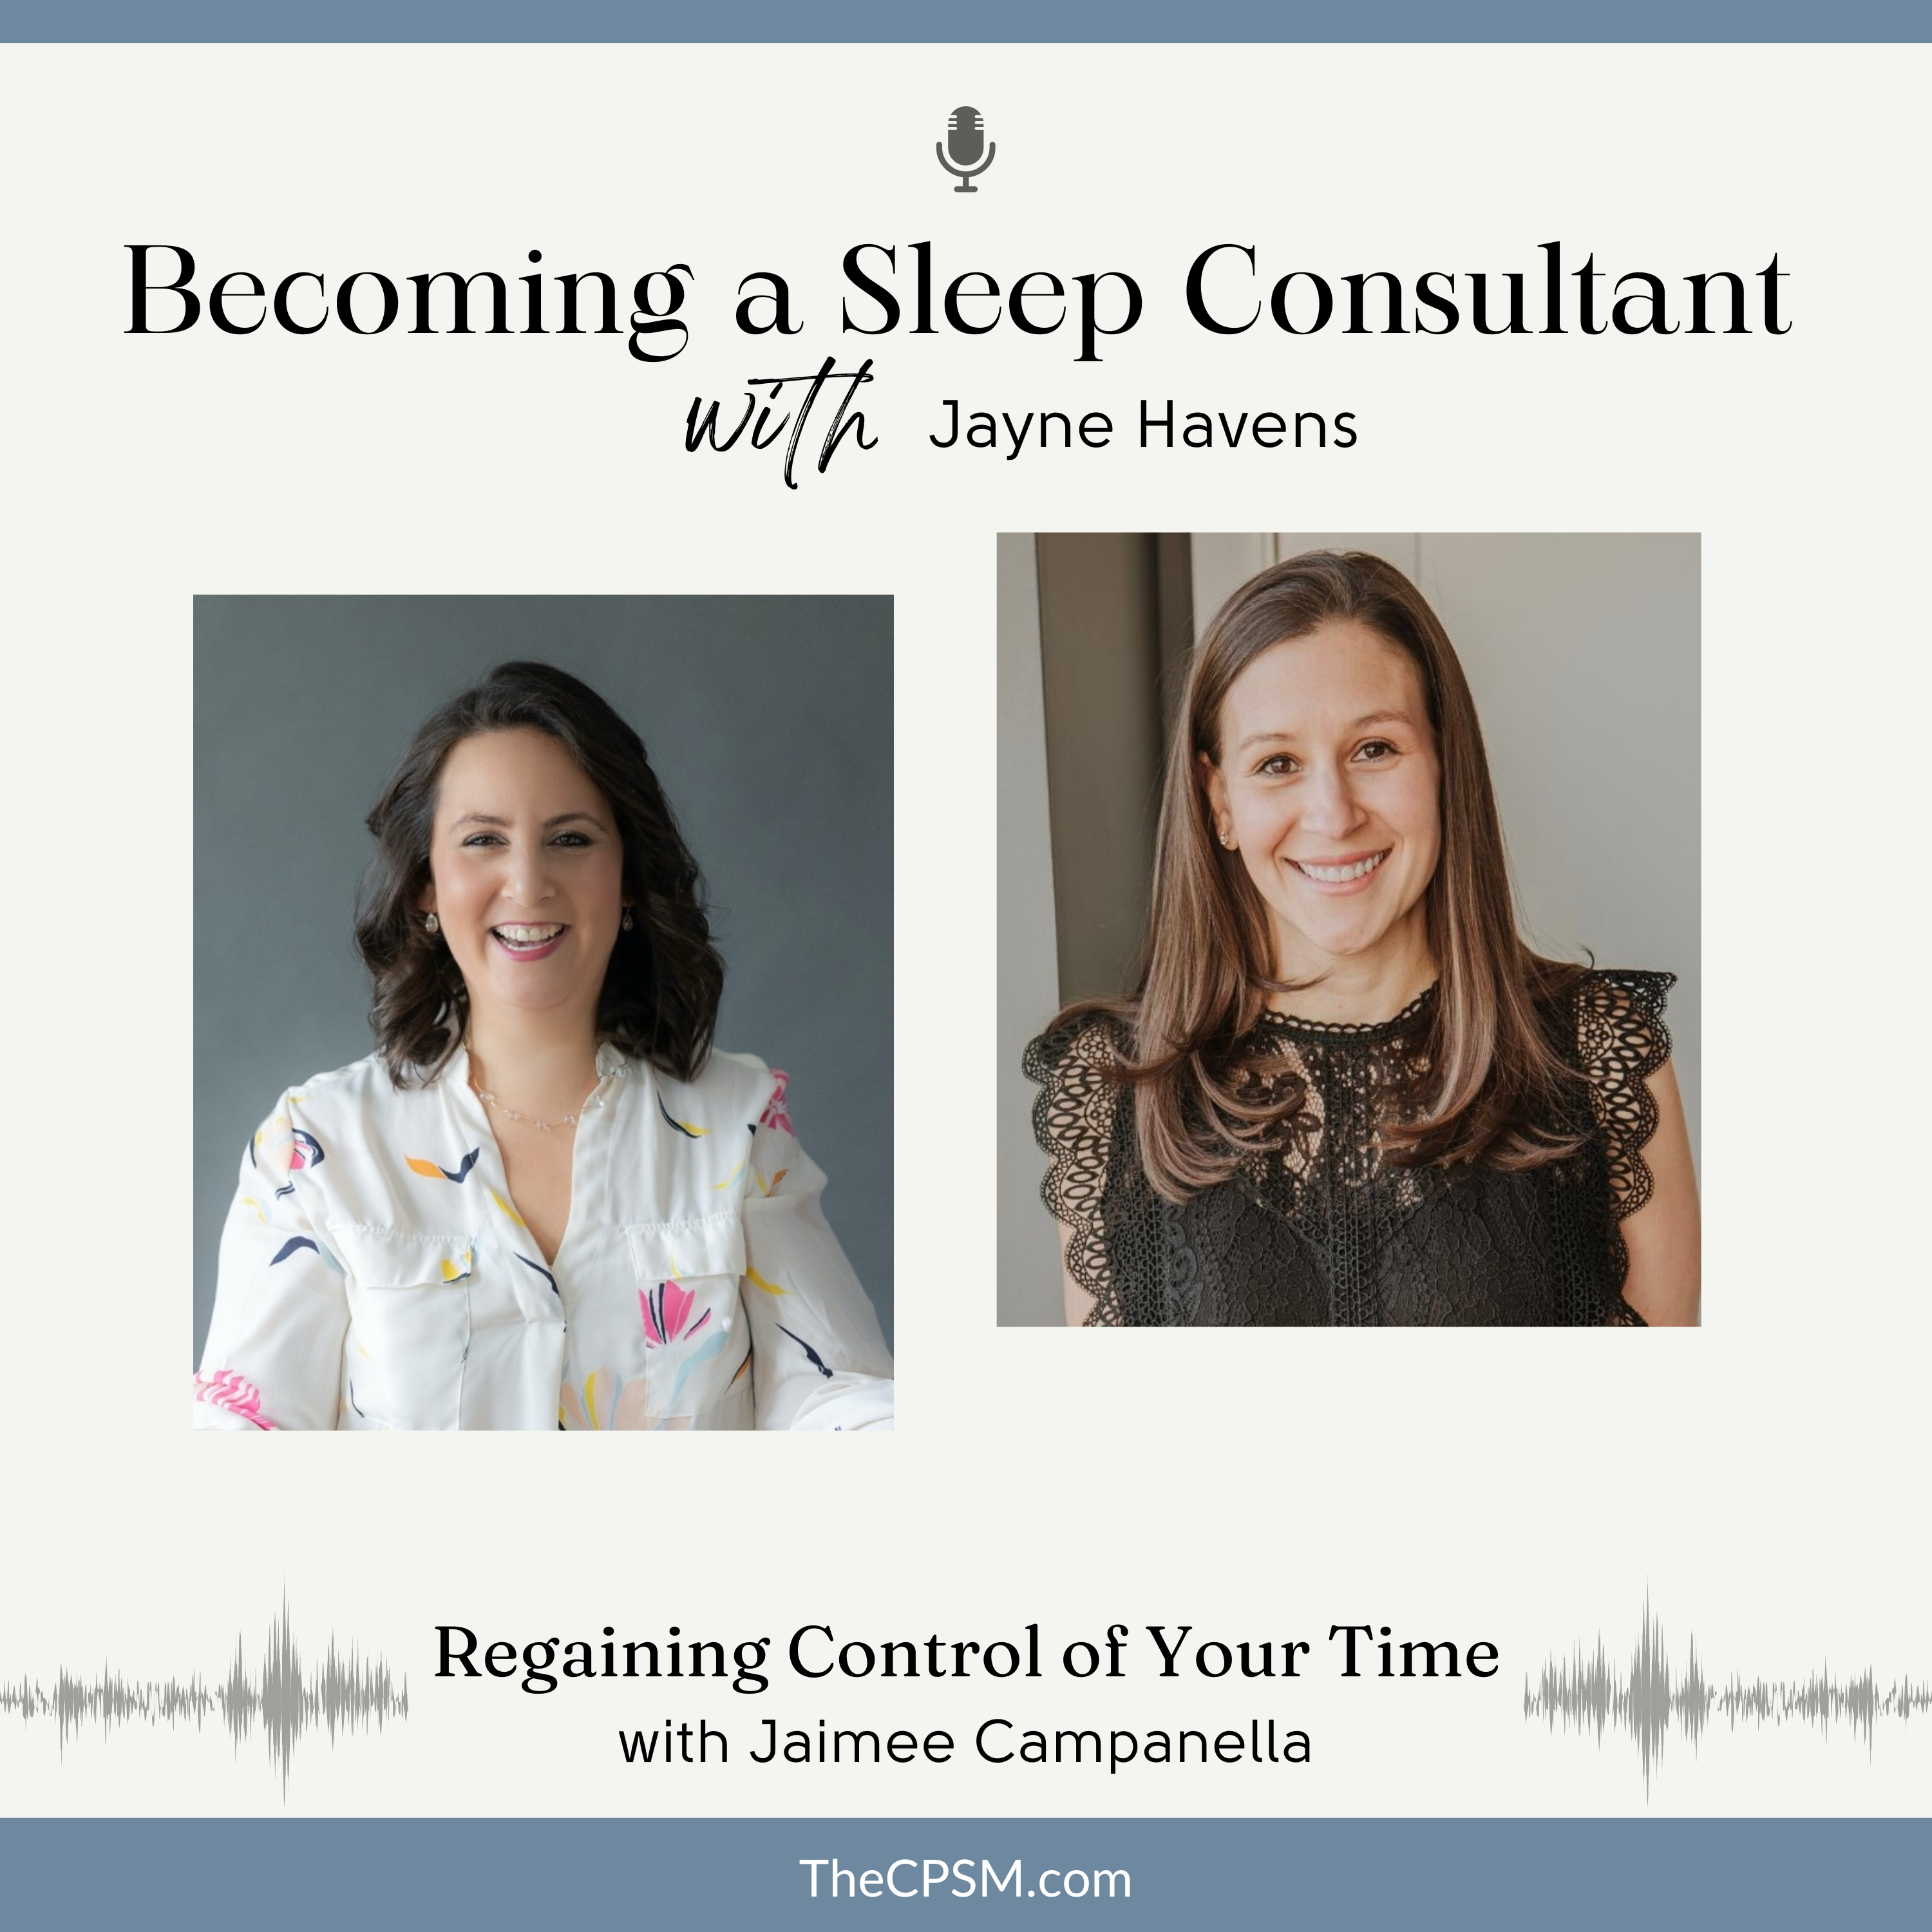 Regaining Control of Your Time with Jaimee Campanella